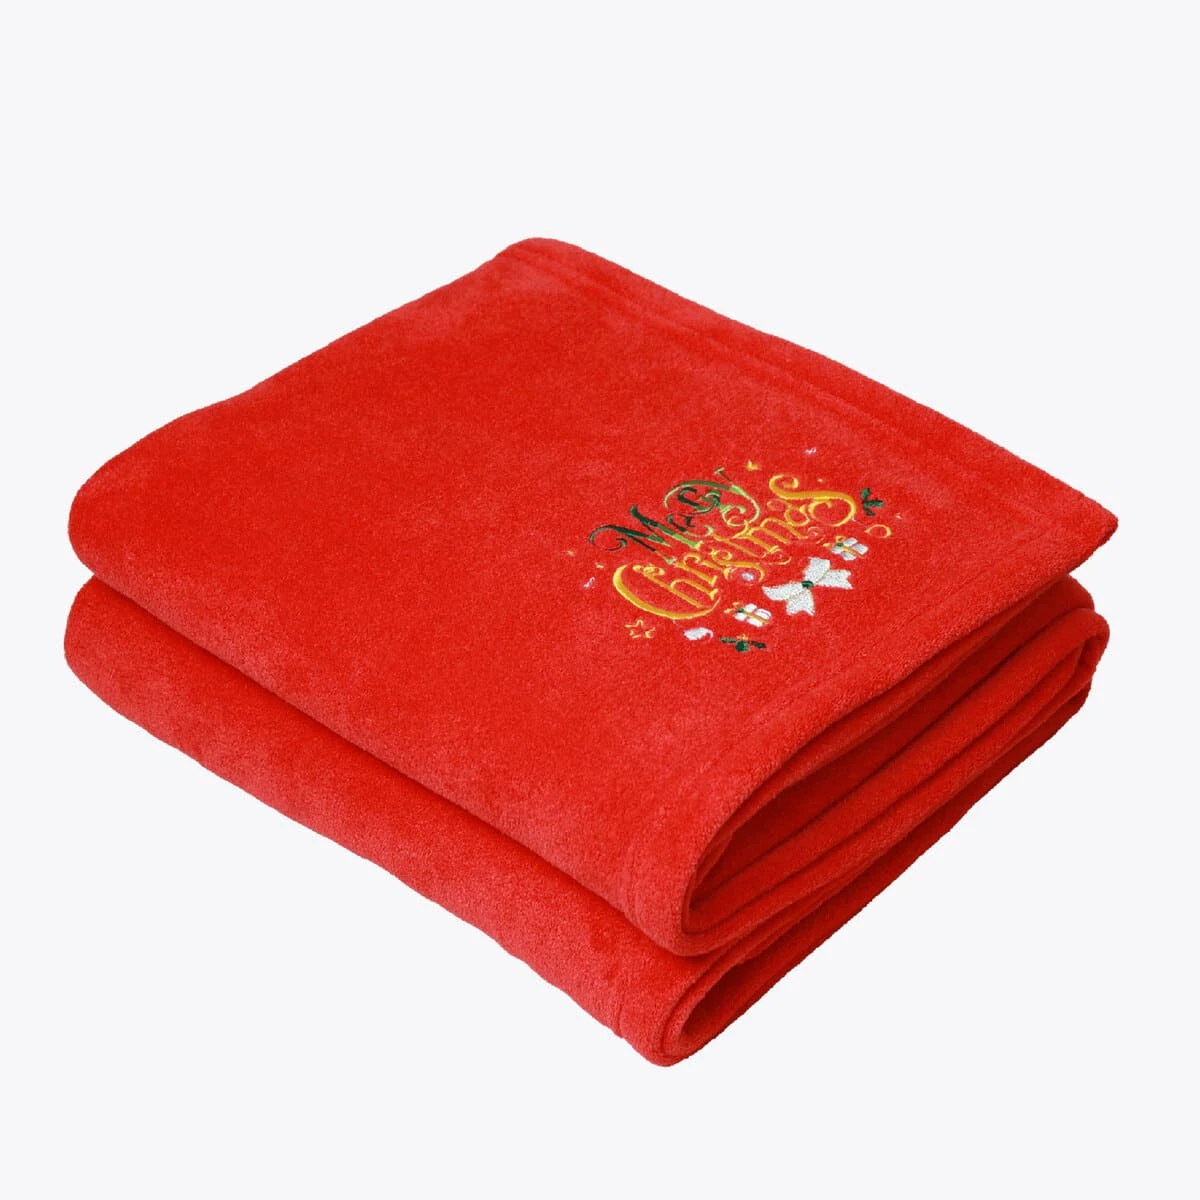 Merry Christmas Embroidery Flannel Blanket